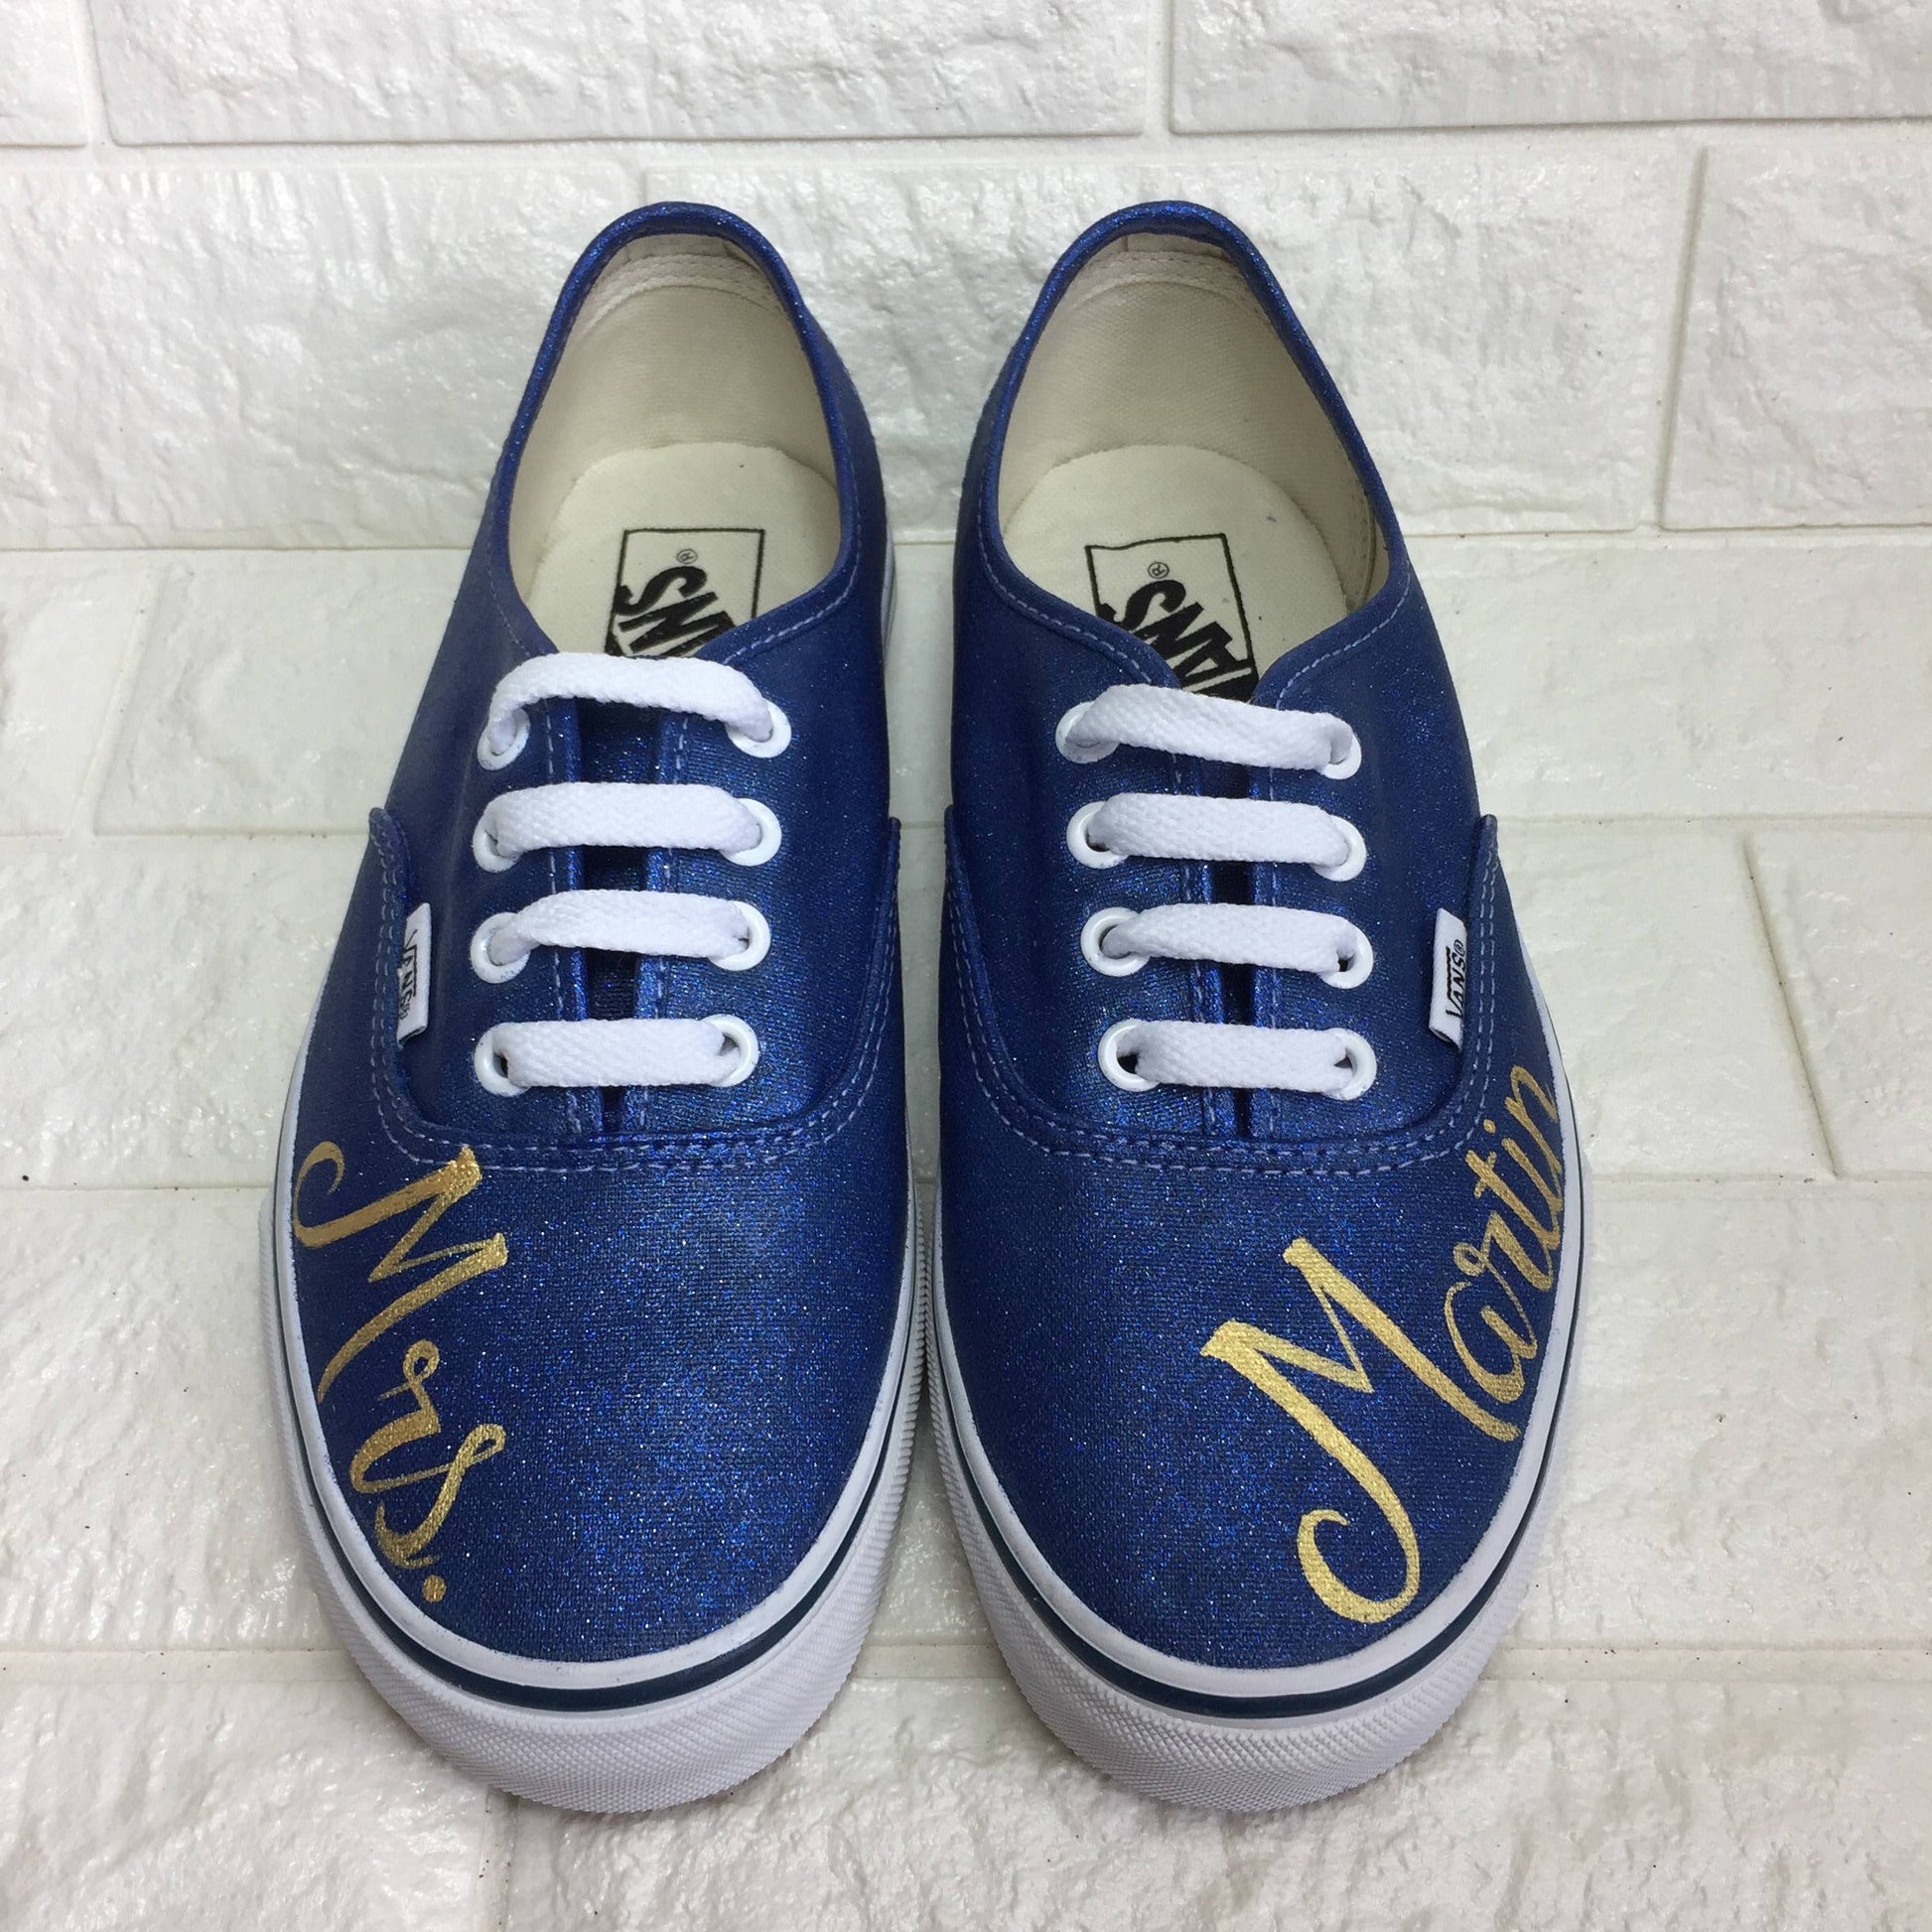 Sparkly Navy Glitter Wedding Vans with Mrs. painted in gold on front